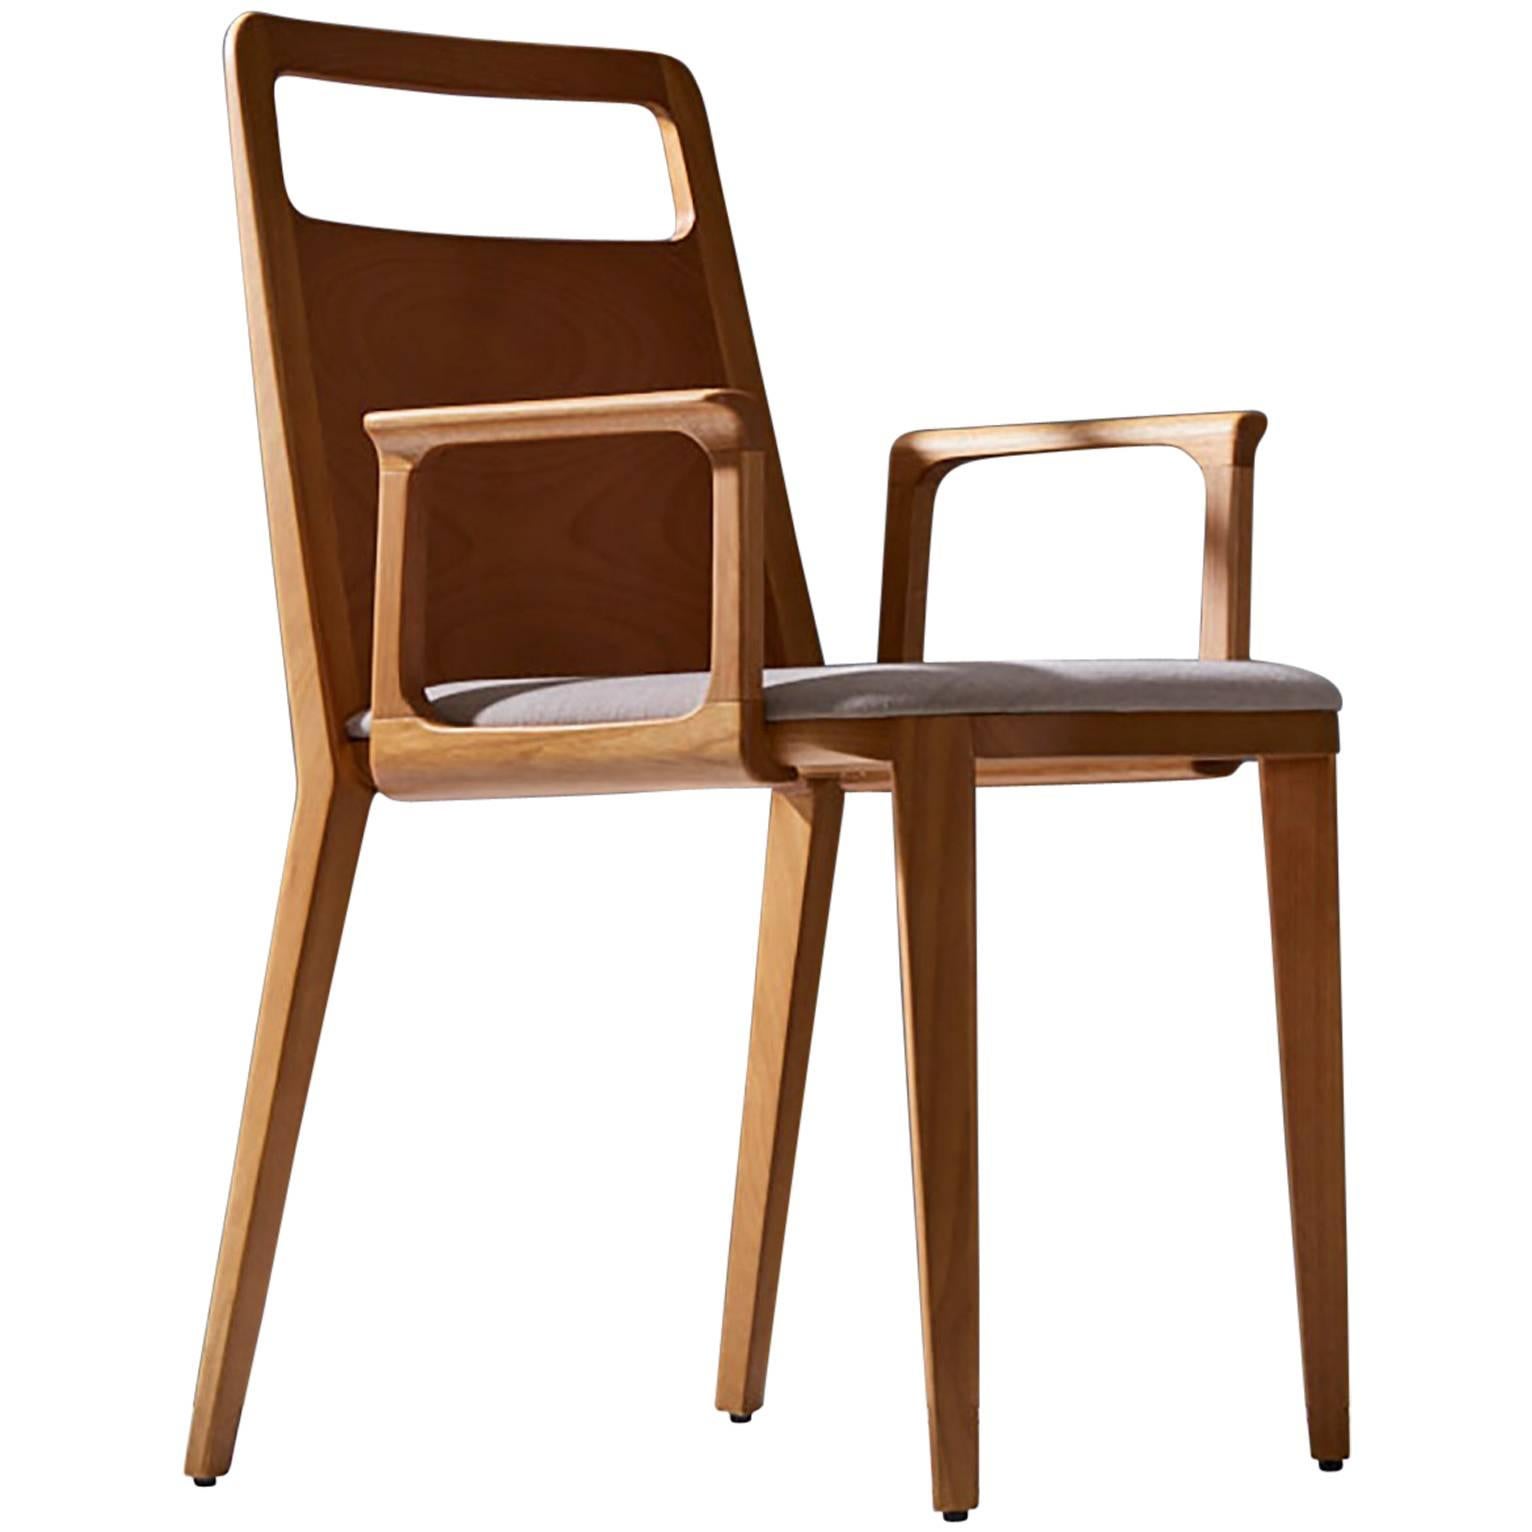 Minimalist solid wood Chair with textile or Leather Upholstery Seating